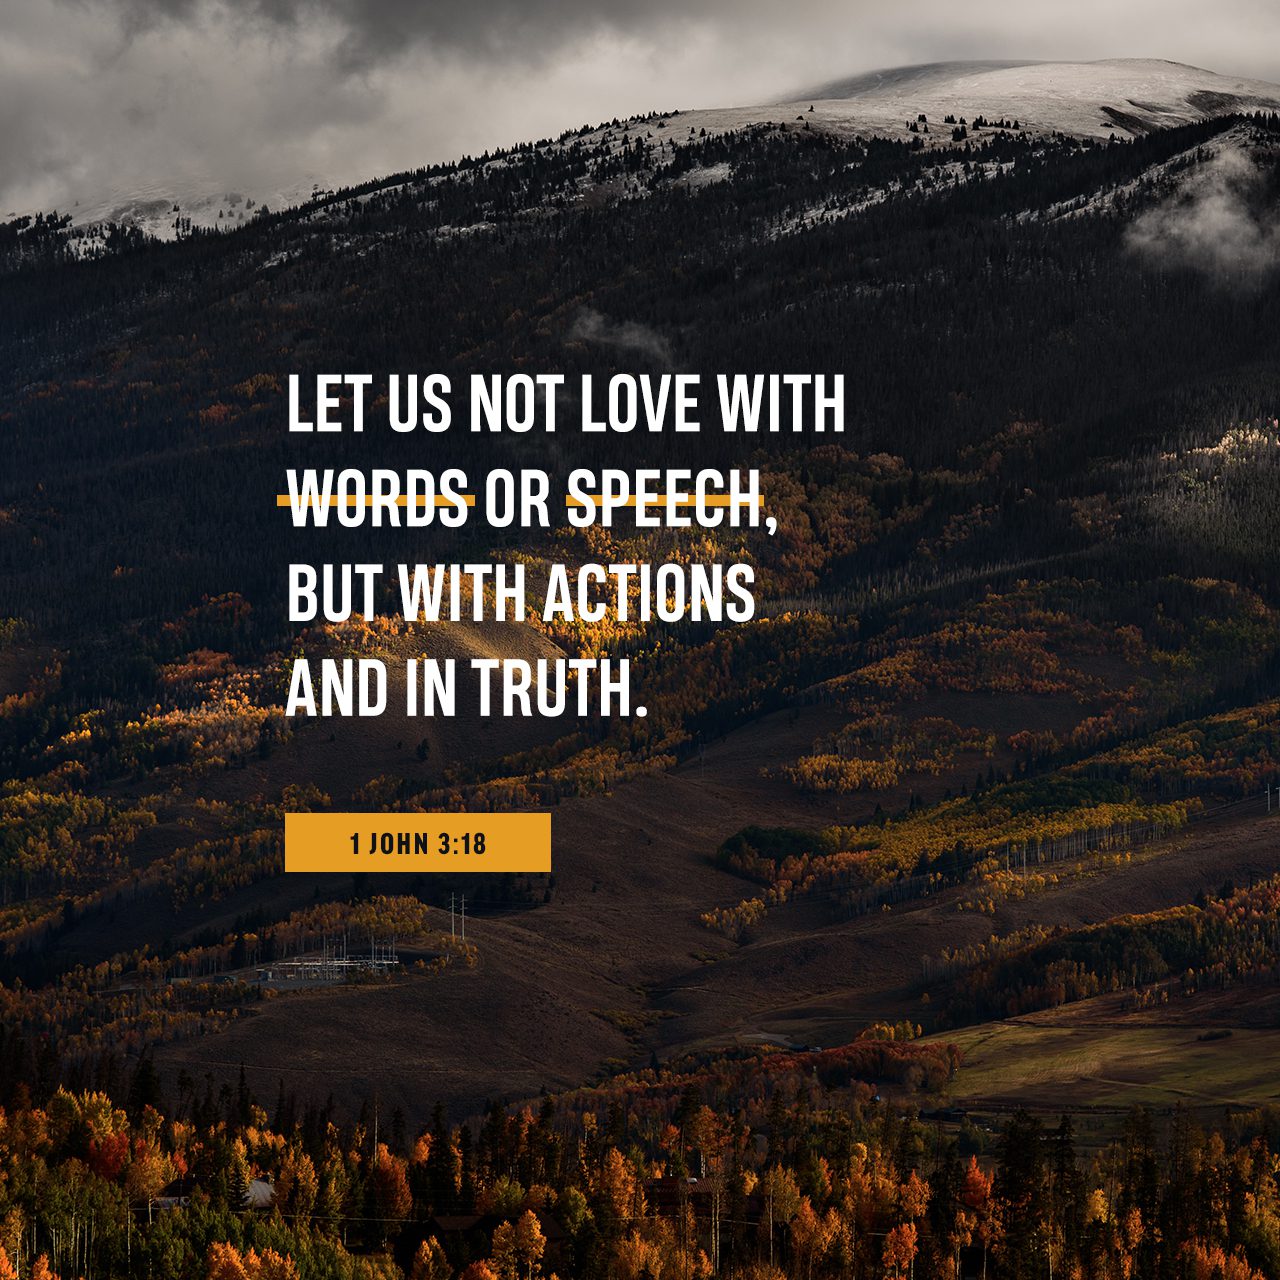 Christian Love: Words and Actions